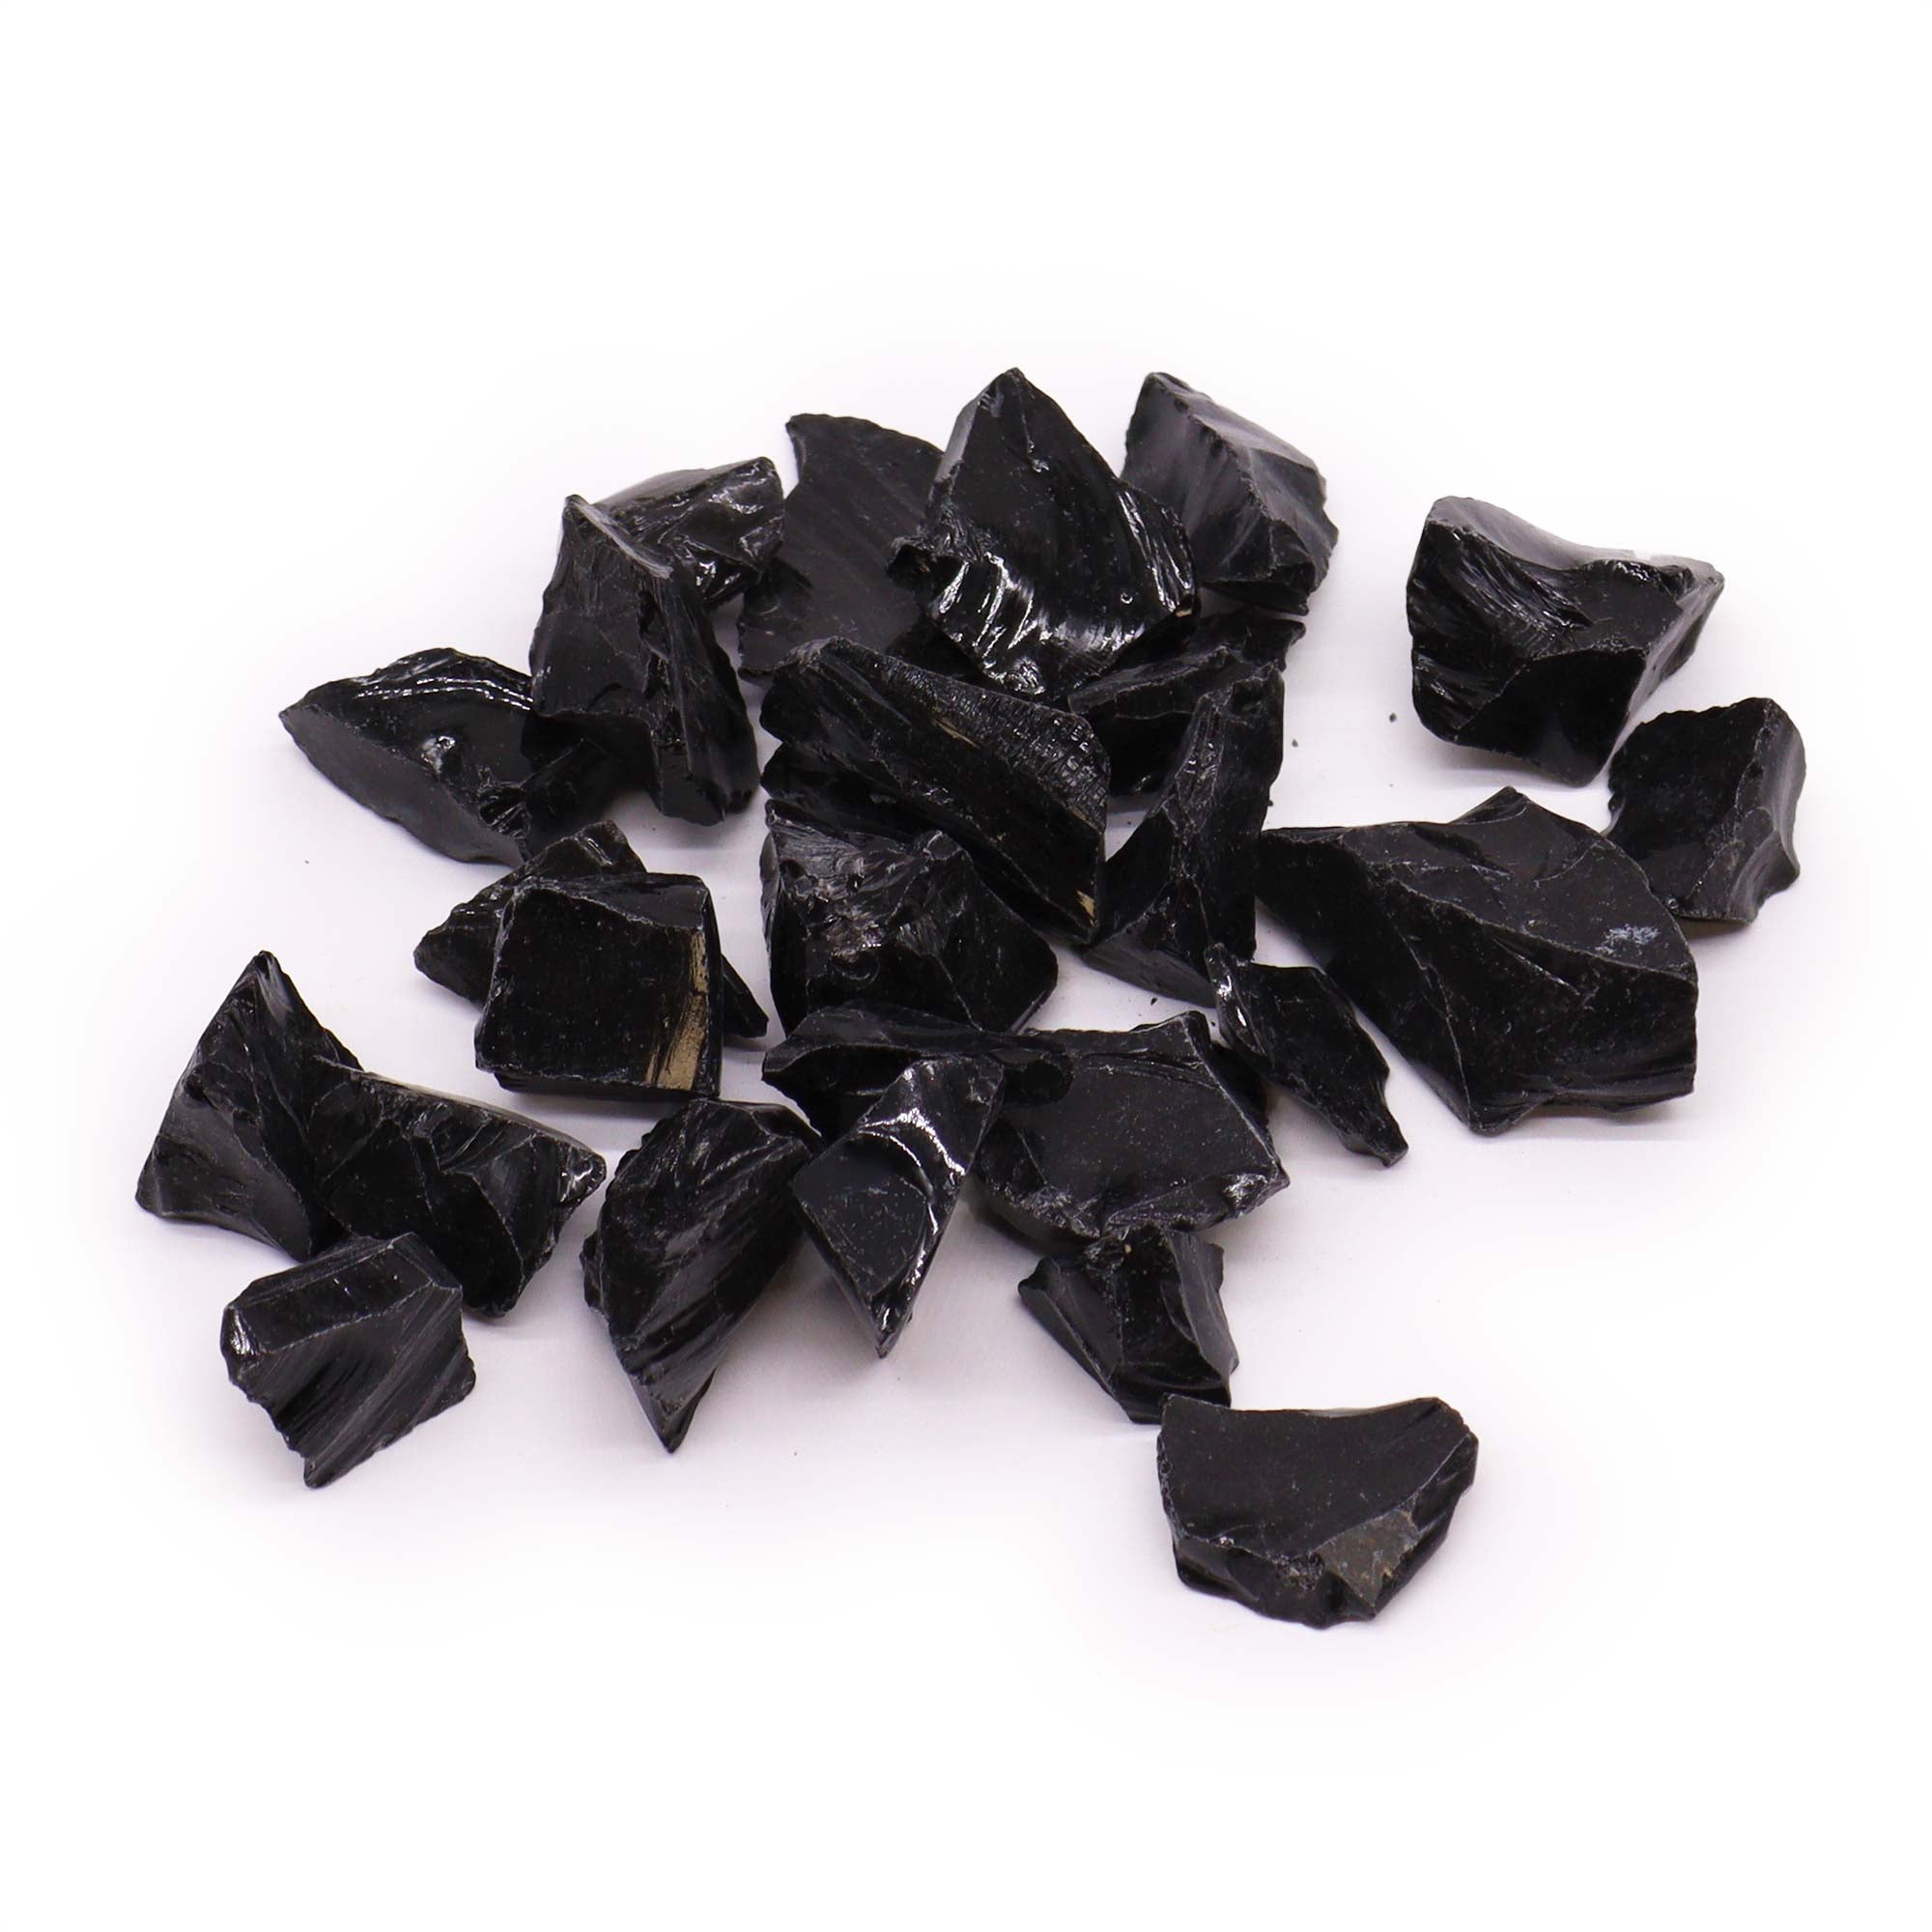 View Raw Crystals 500gm Black Agate information